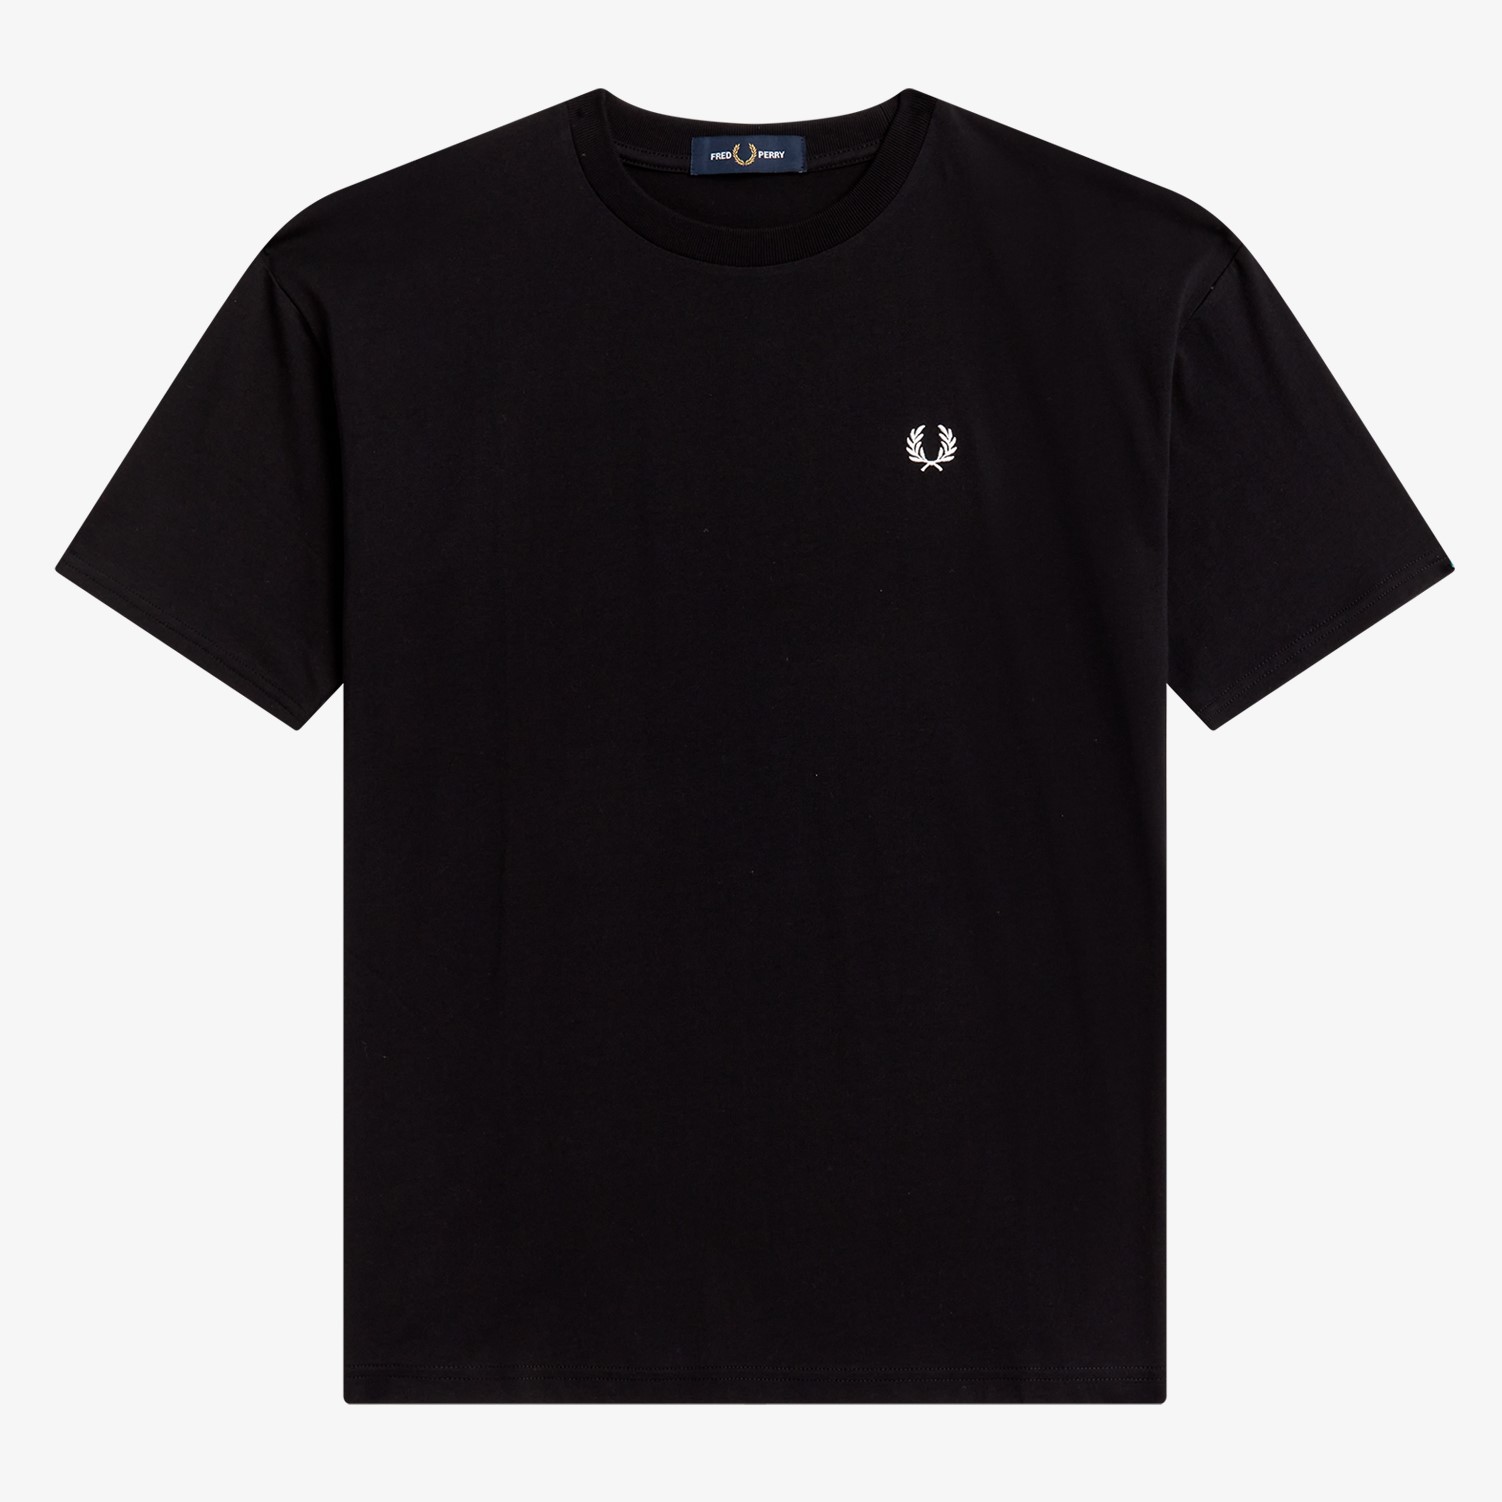 Fred Perry - CREW NECK T-SHIRT (WOMEN) - Black